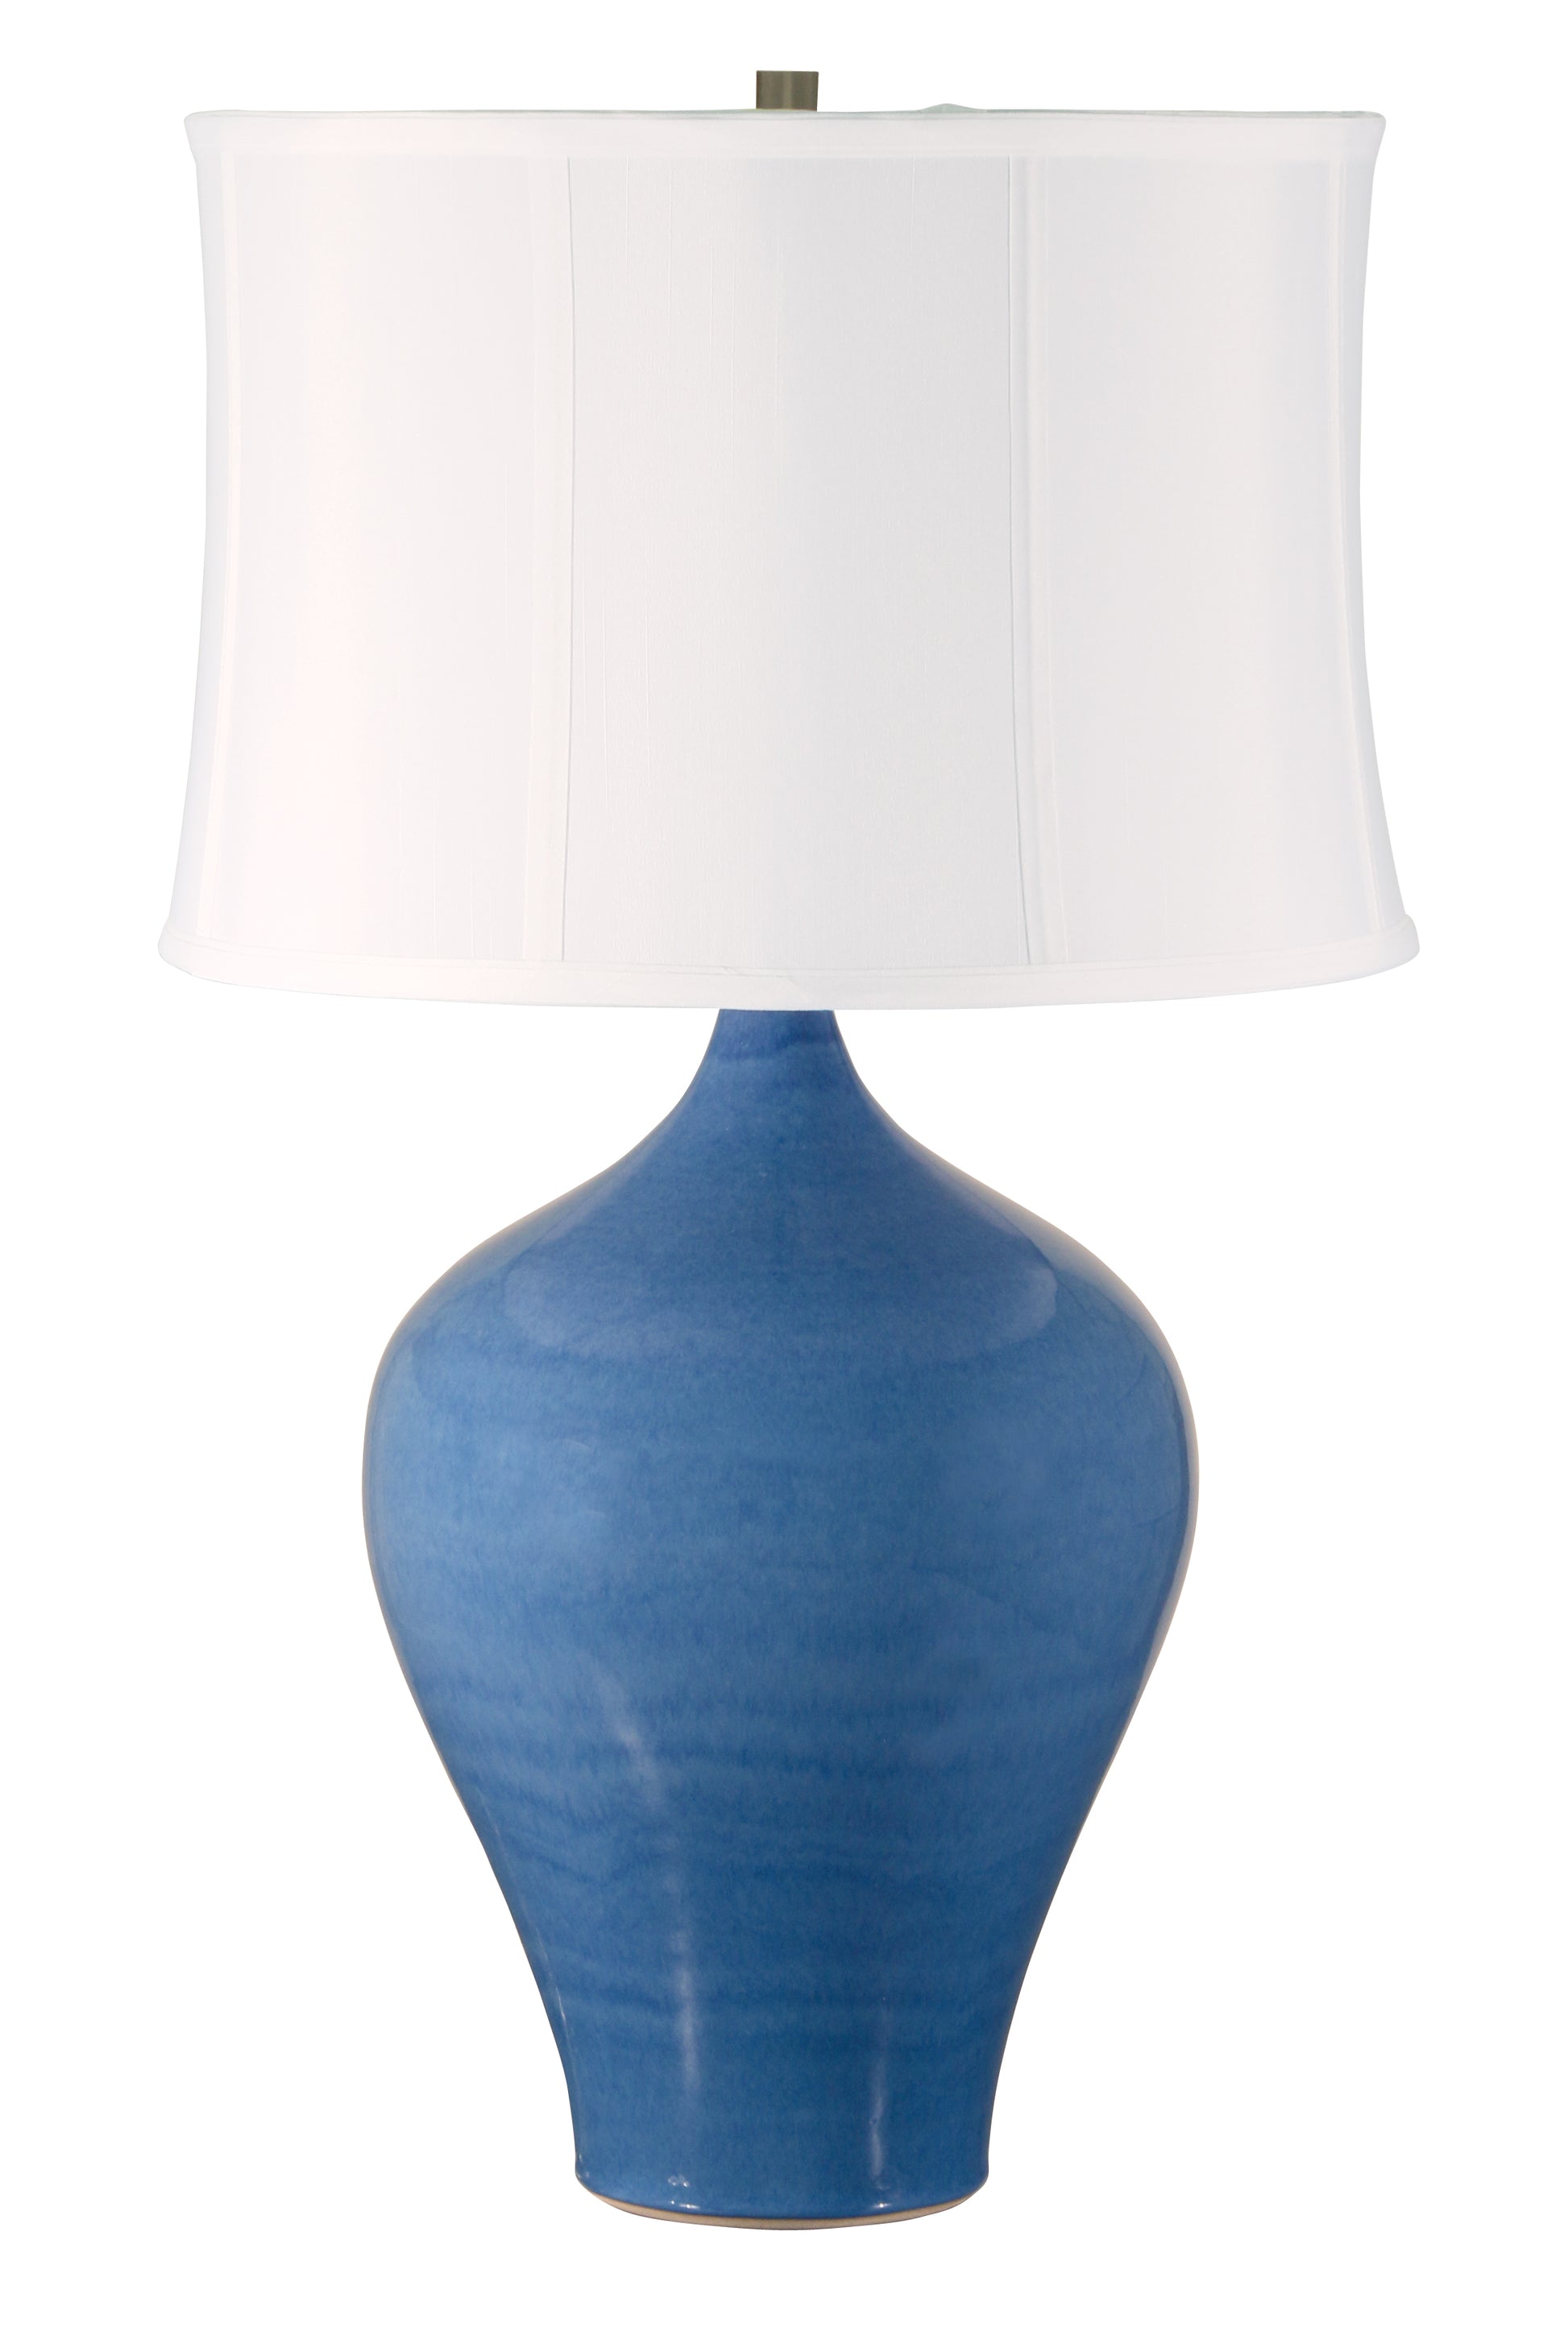 House of Troy Scatchard 25" Stoneware Table Lamp in Cornflower Blue GS160-CB